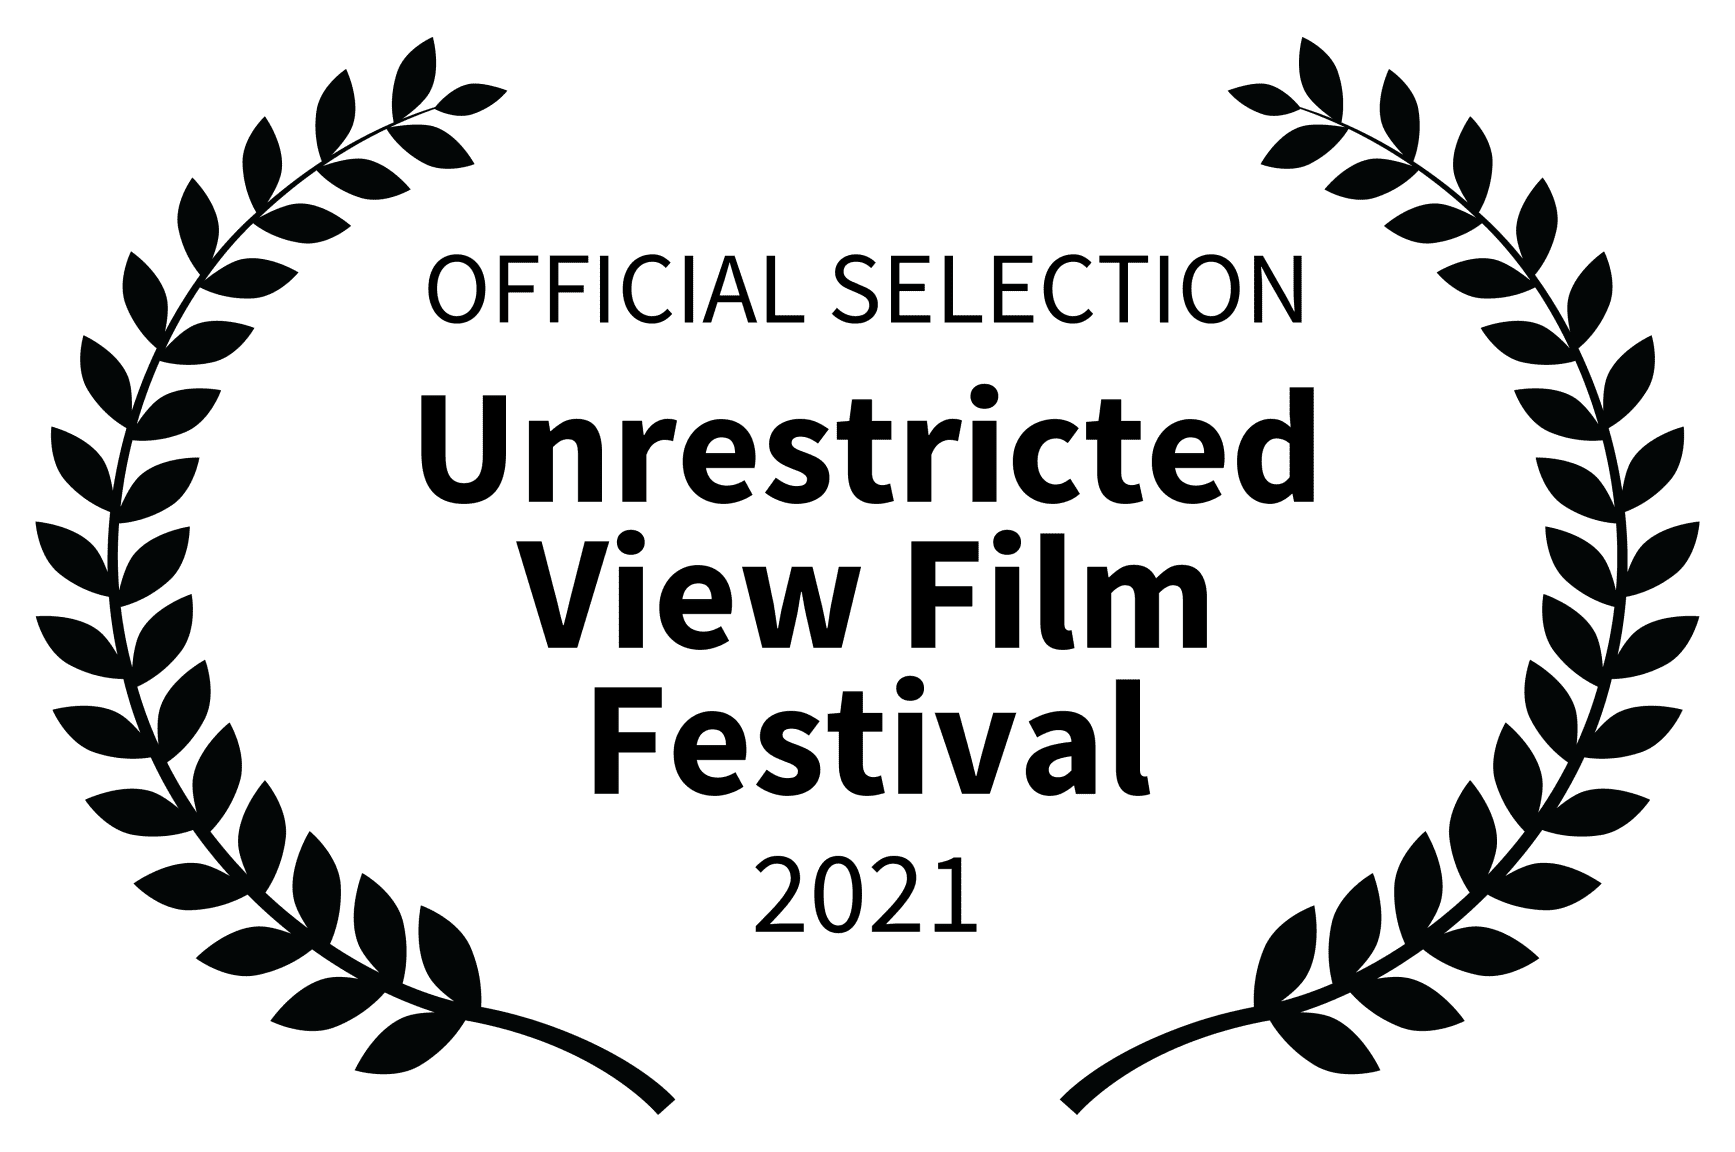 OFFICIAL SELECTION - Unrestricted View Film Festival - 2021